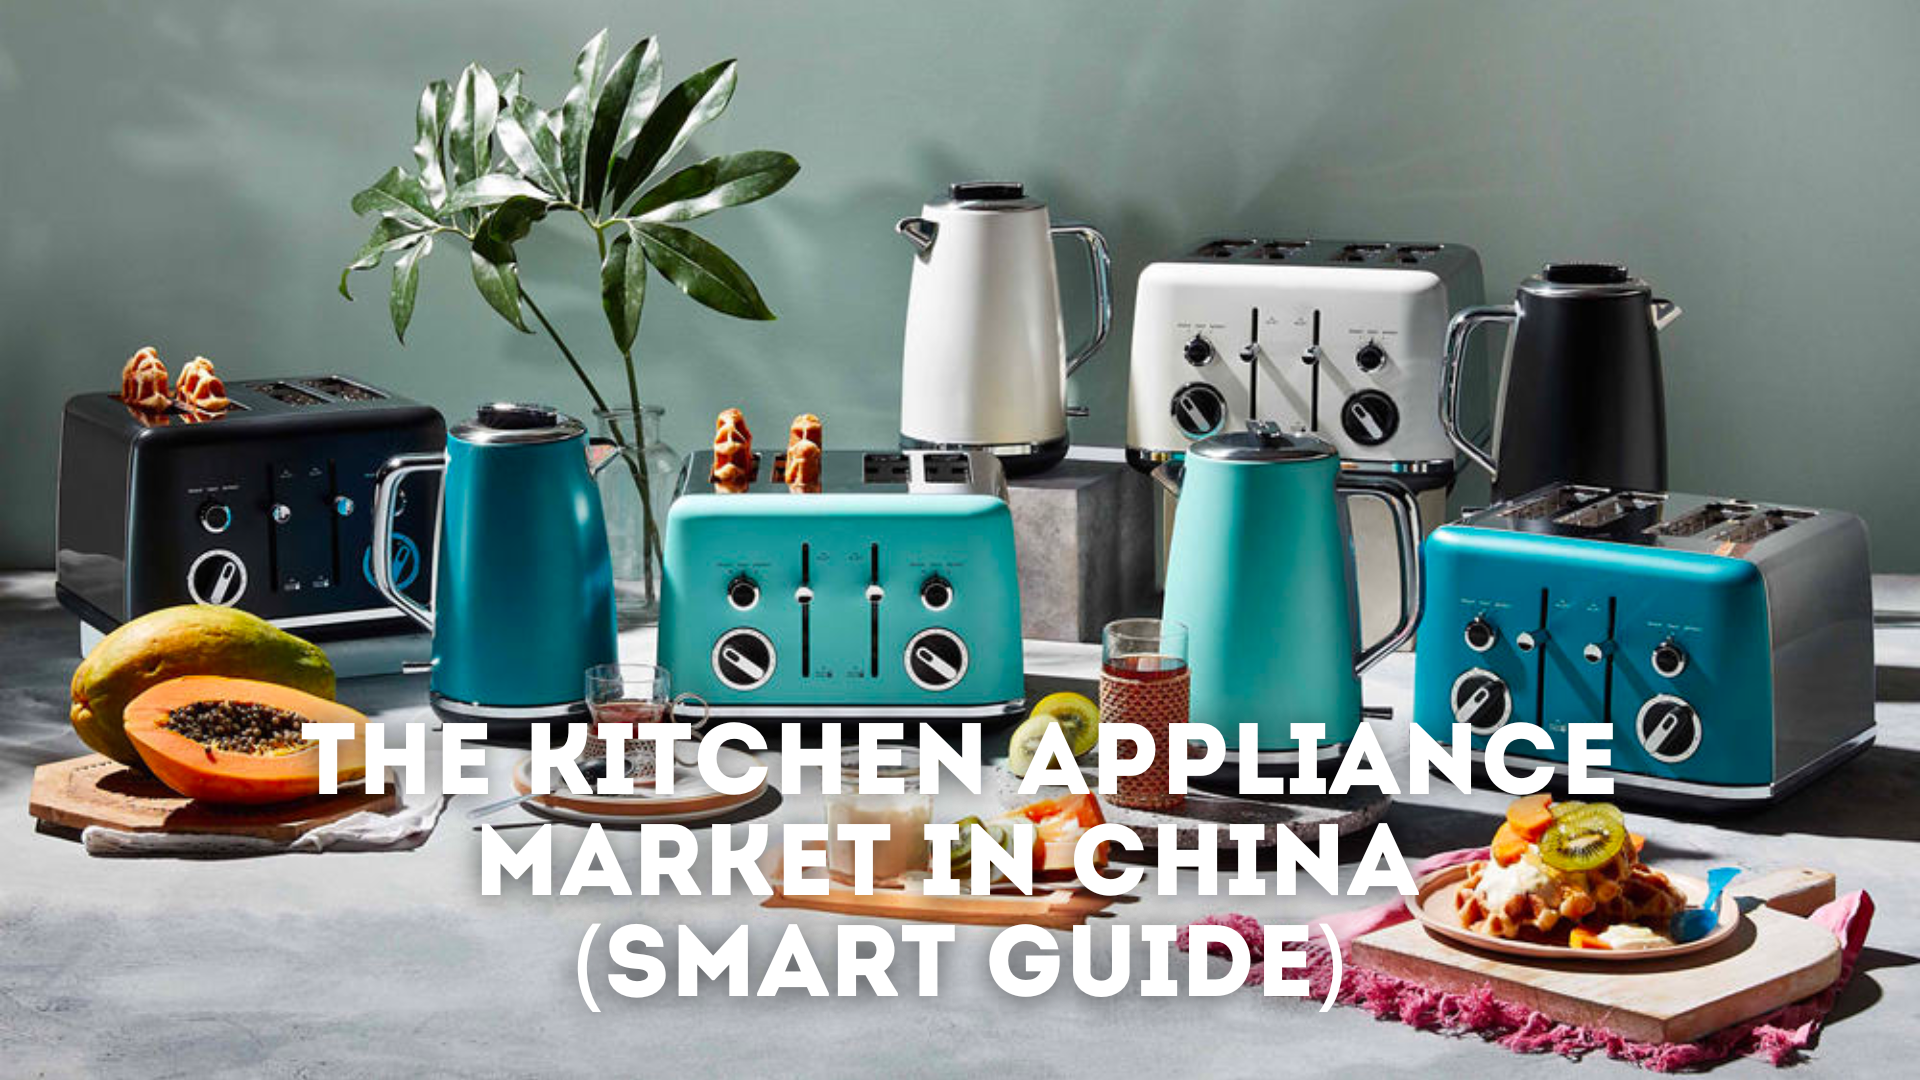 https://ecommercechinaagency.com/wp-content/uploads/2021/02/banner-kitchen-appliance.png